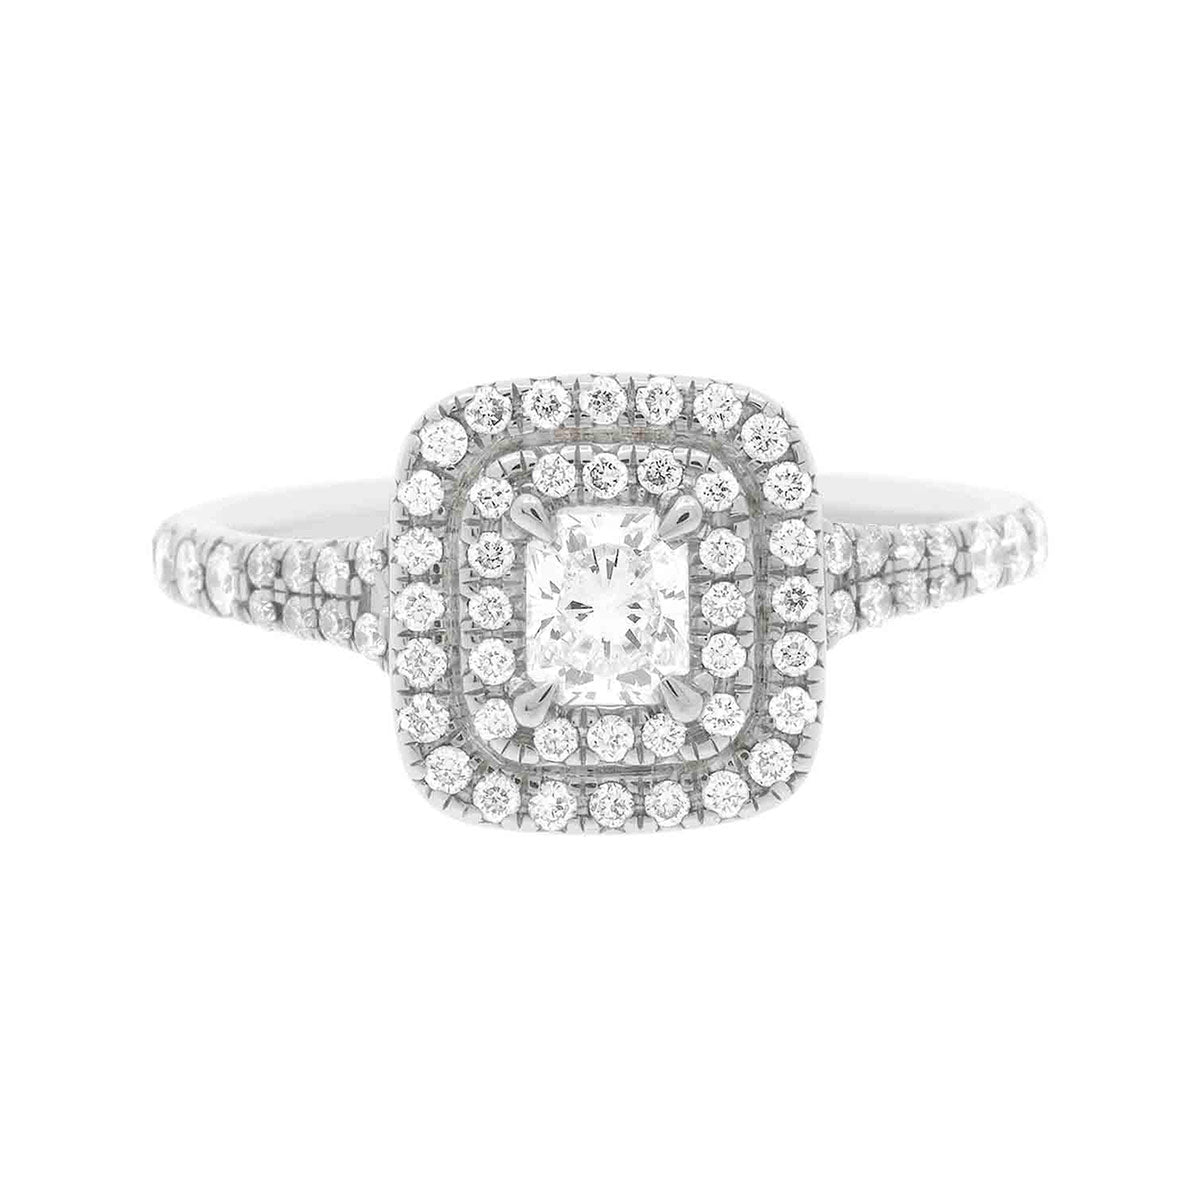 Double Halo Cushion Cut Diamond Ring in white gold